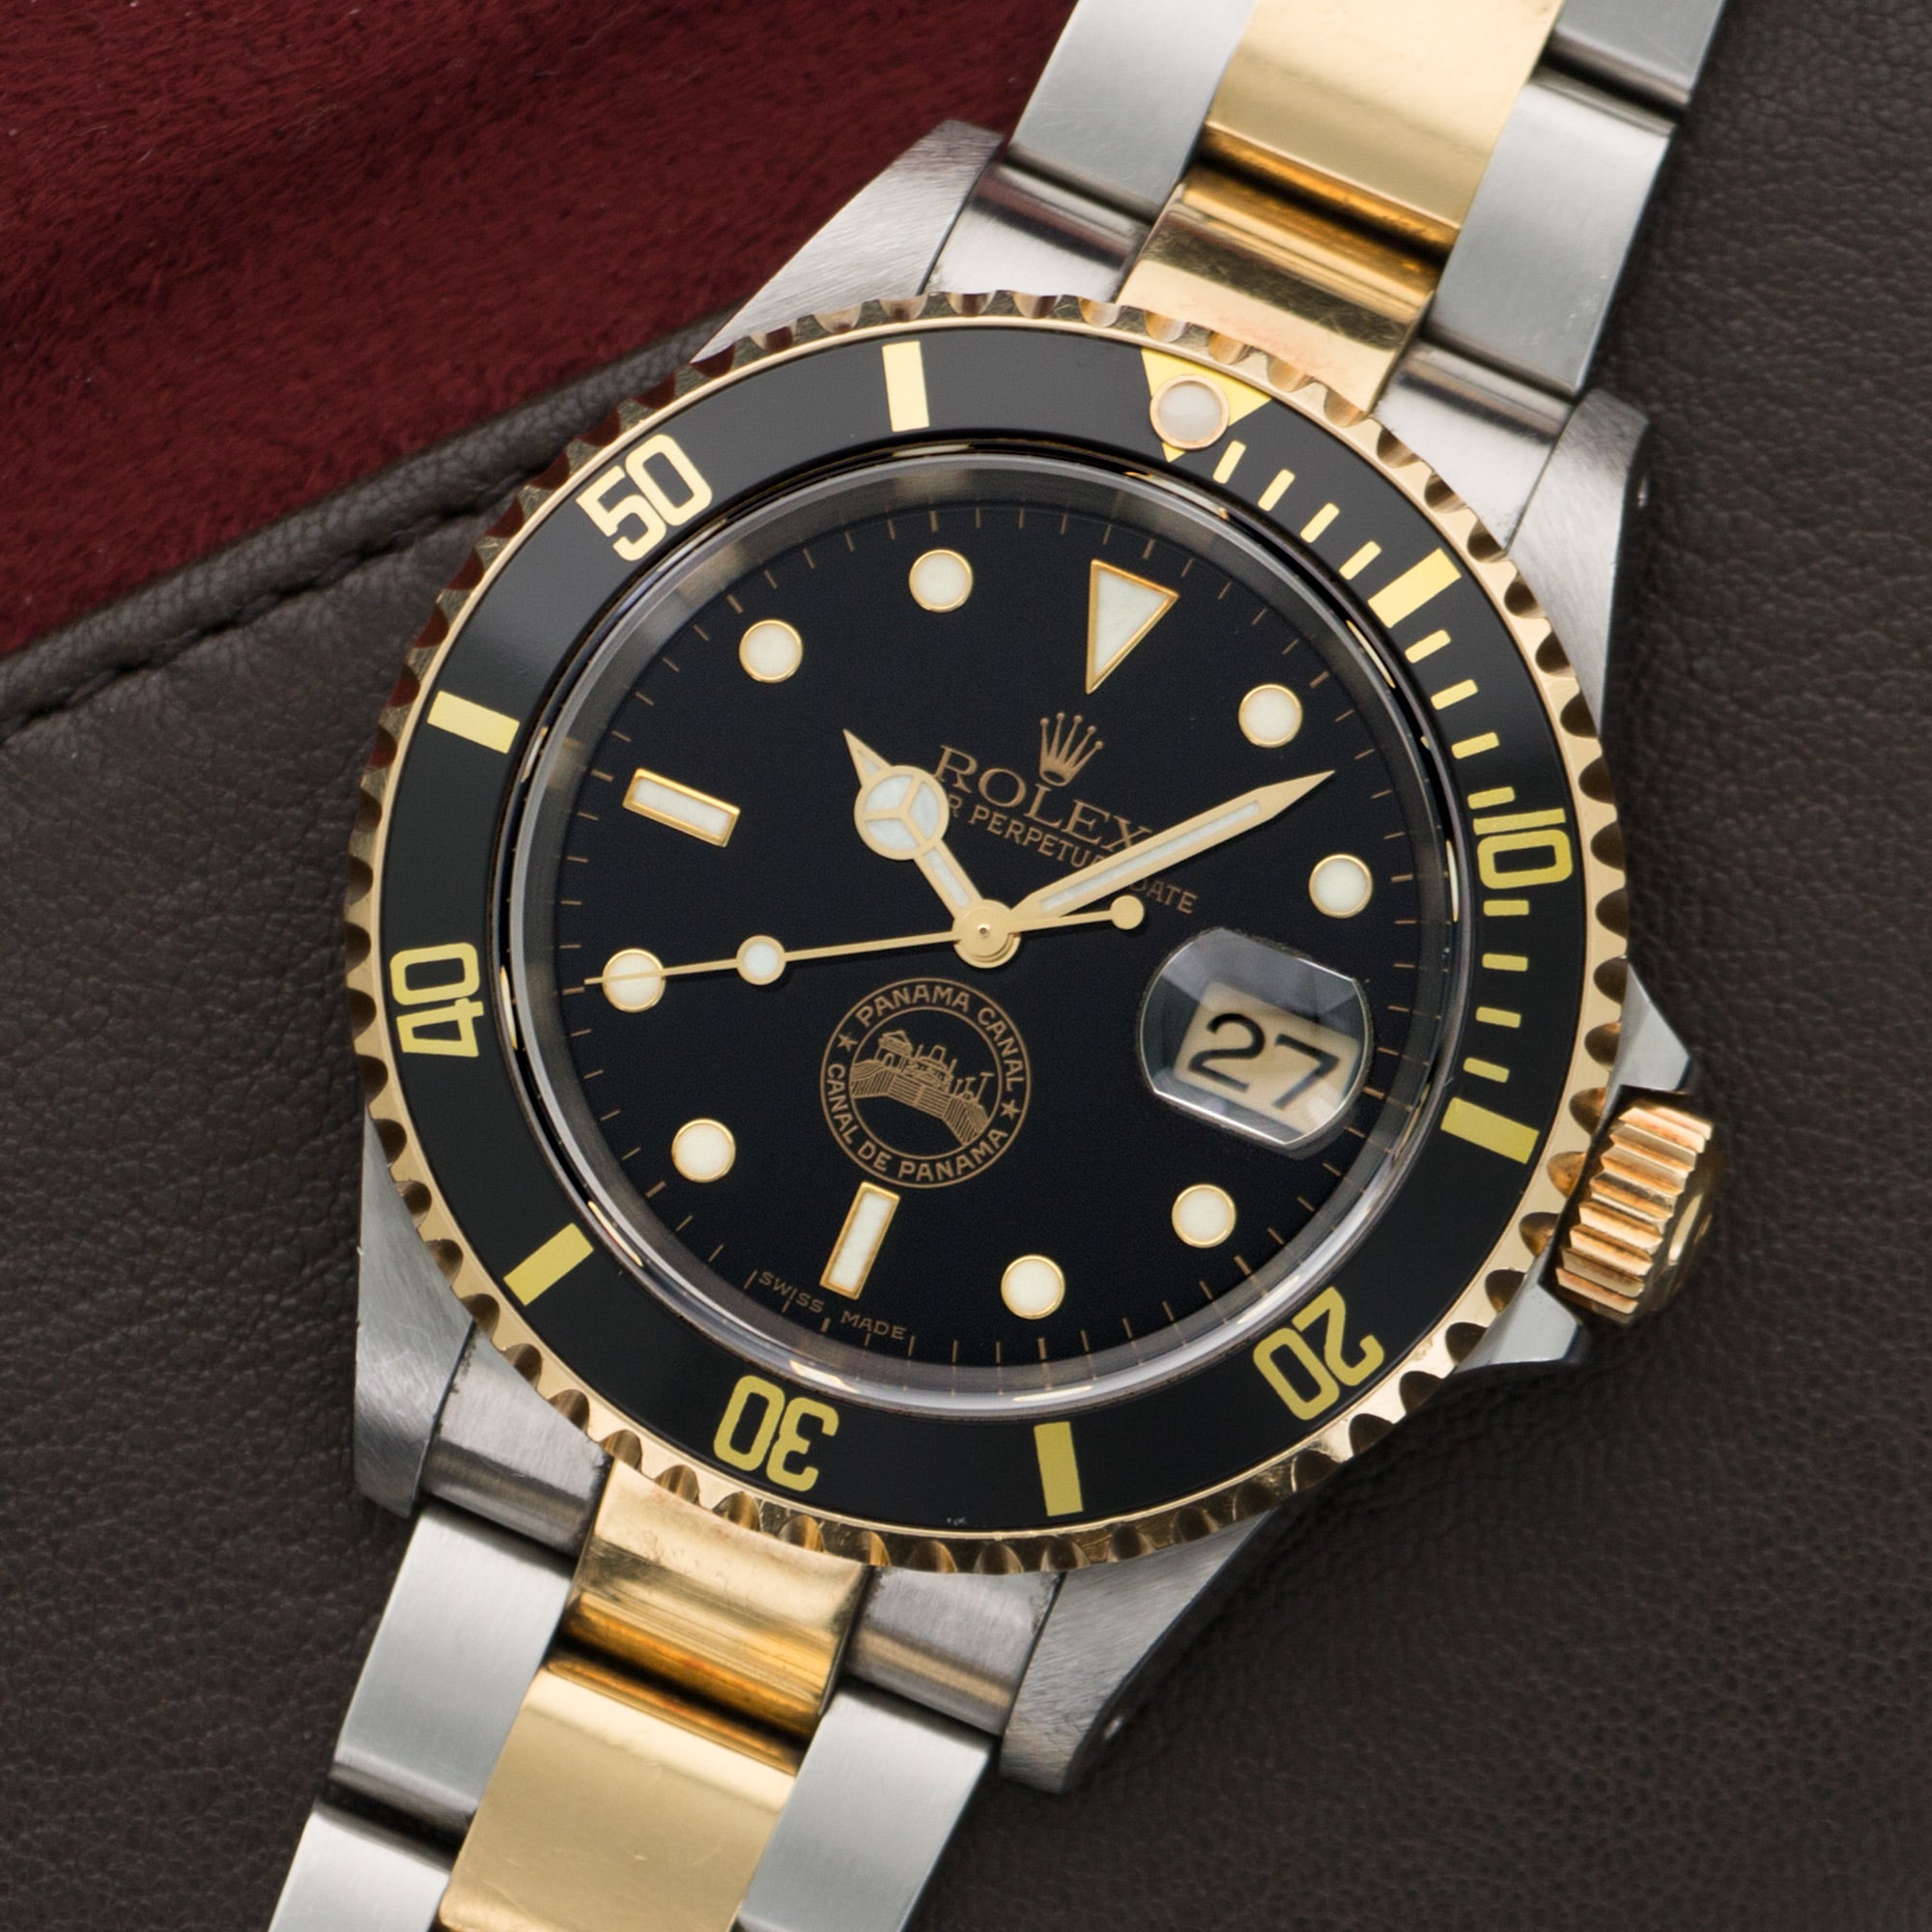 Rolex - Rolex Two-Tone Submariner Panama Canal Watch Ref. 16613 - The Keystone Watches